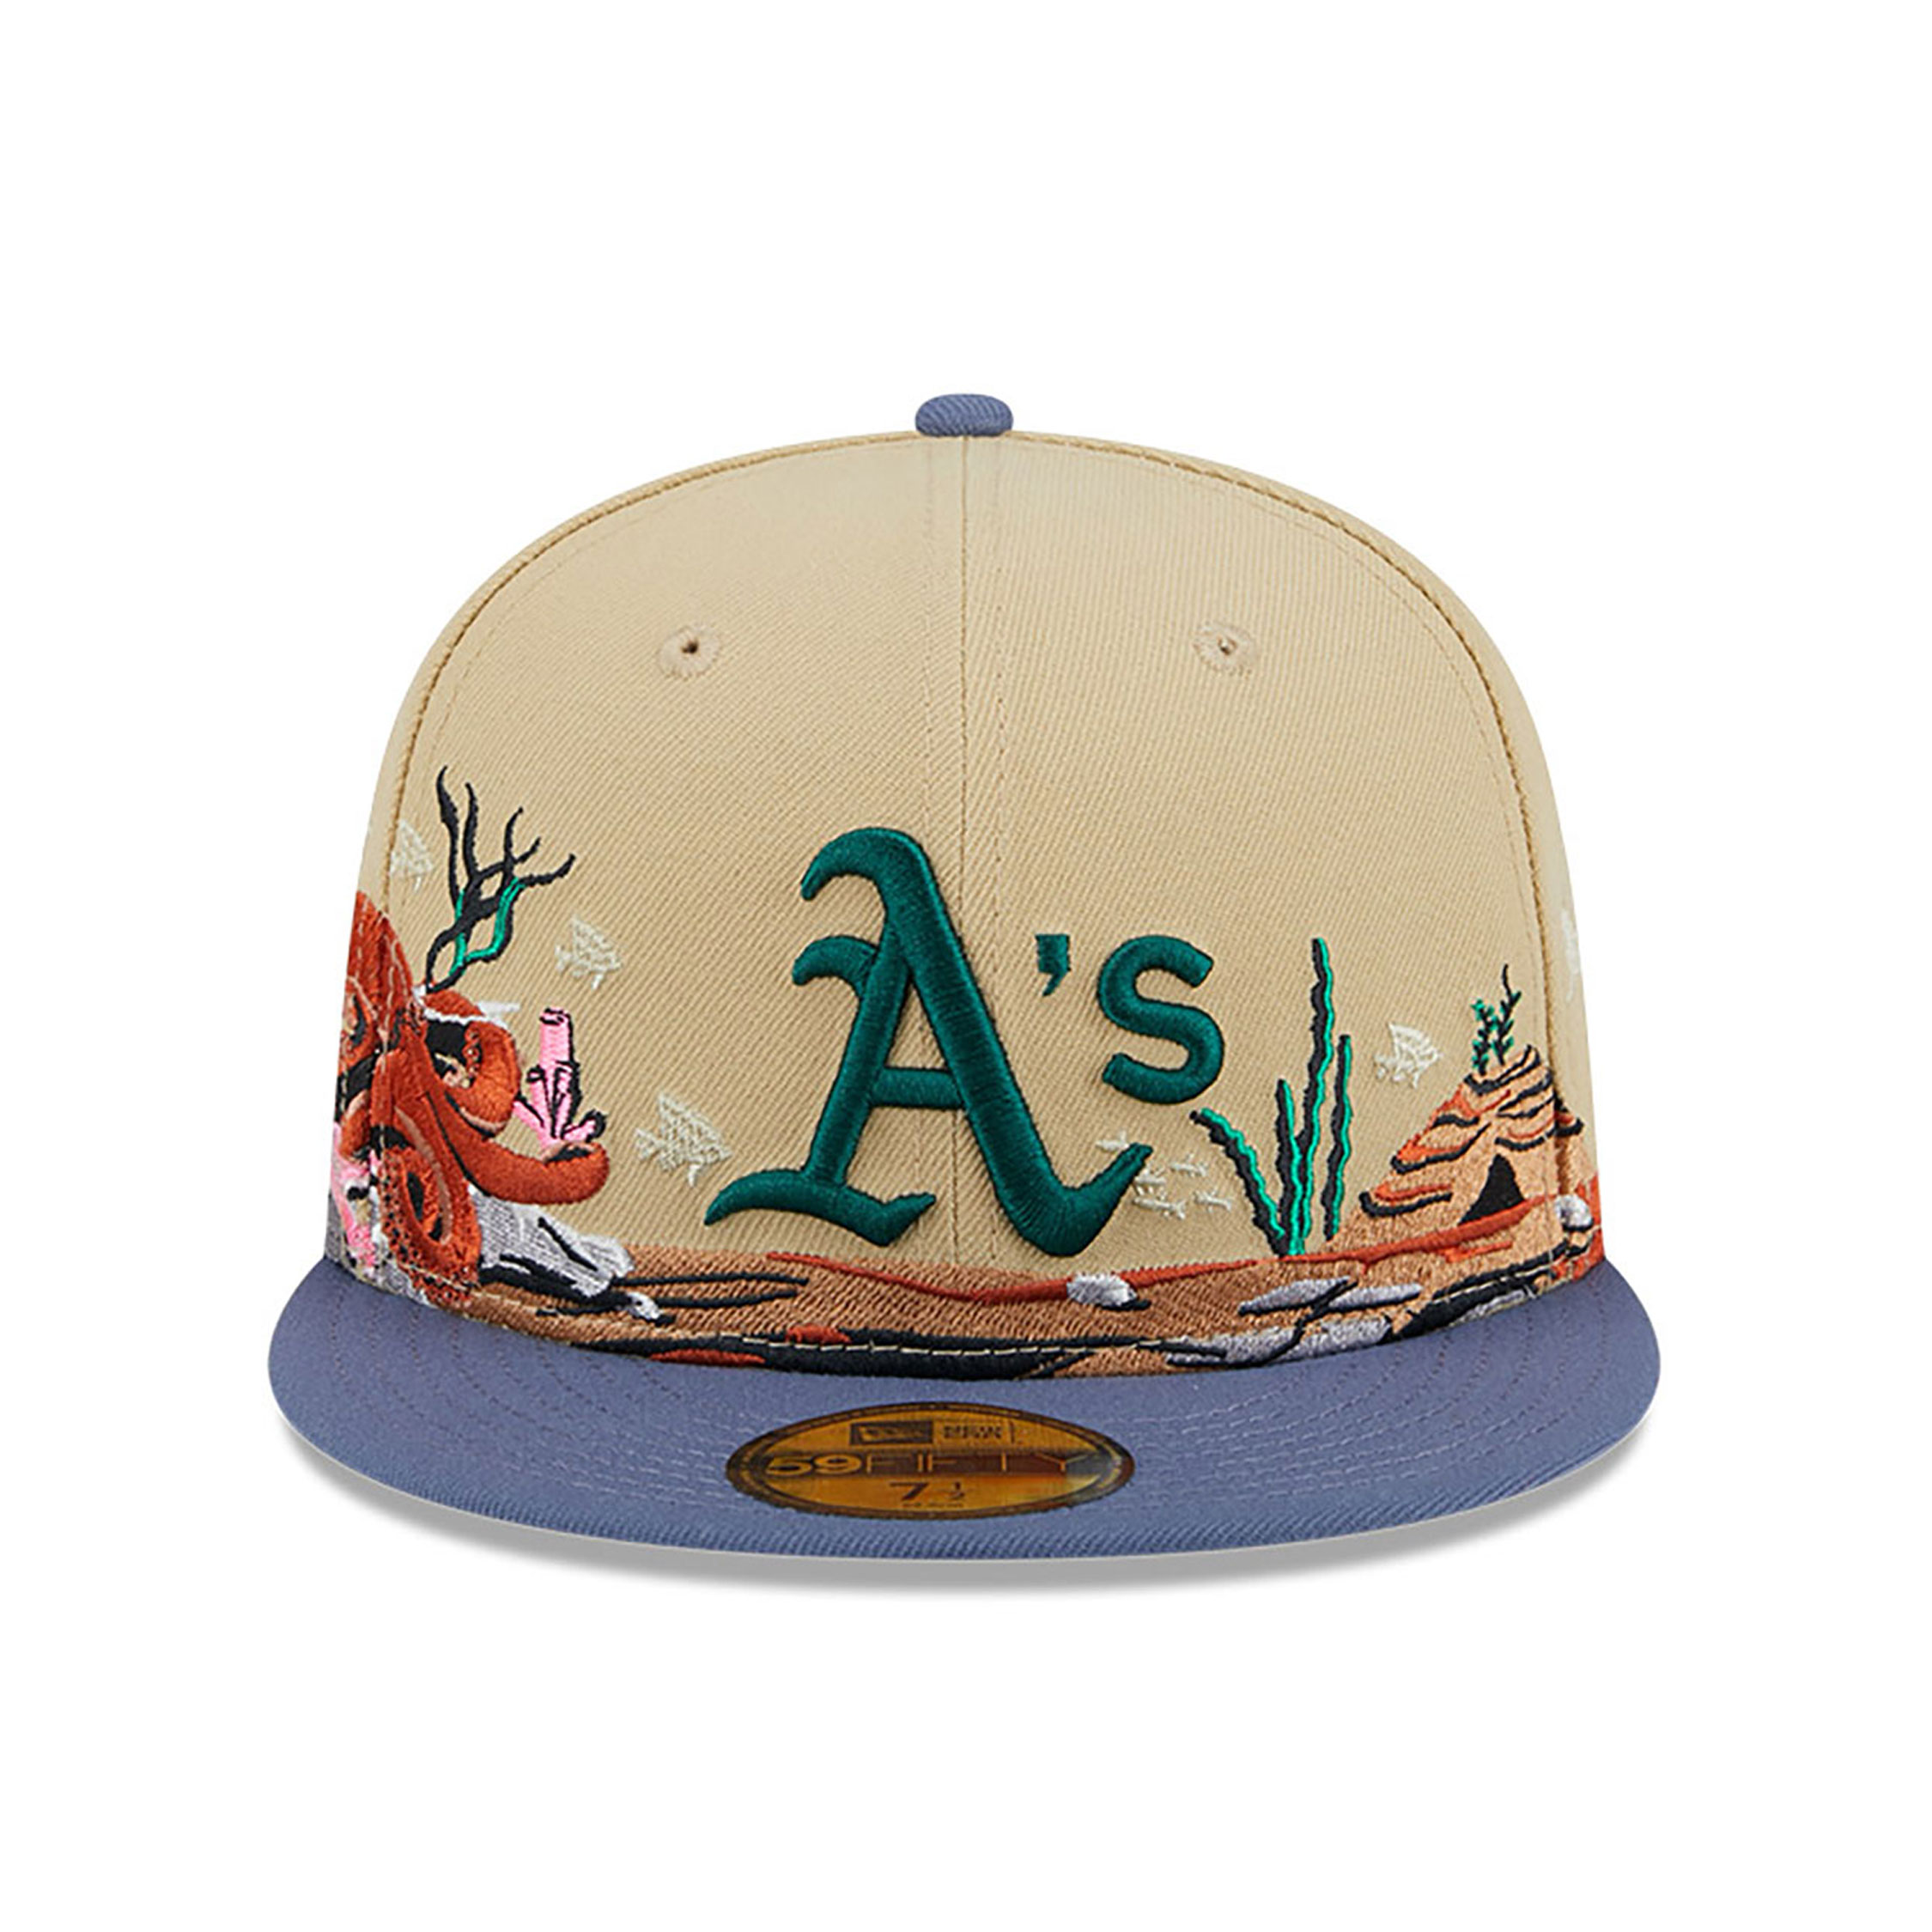 Oakland Athletics Team Landscape Light Beige 59FIFTY Fitted Cap